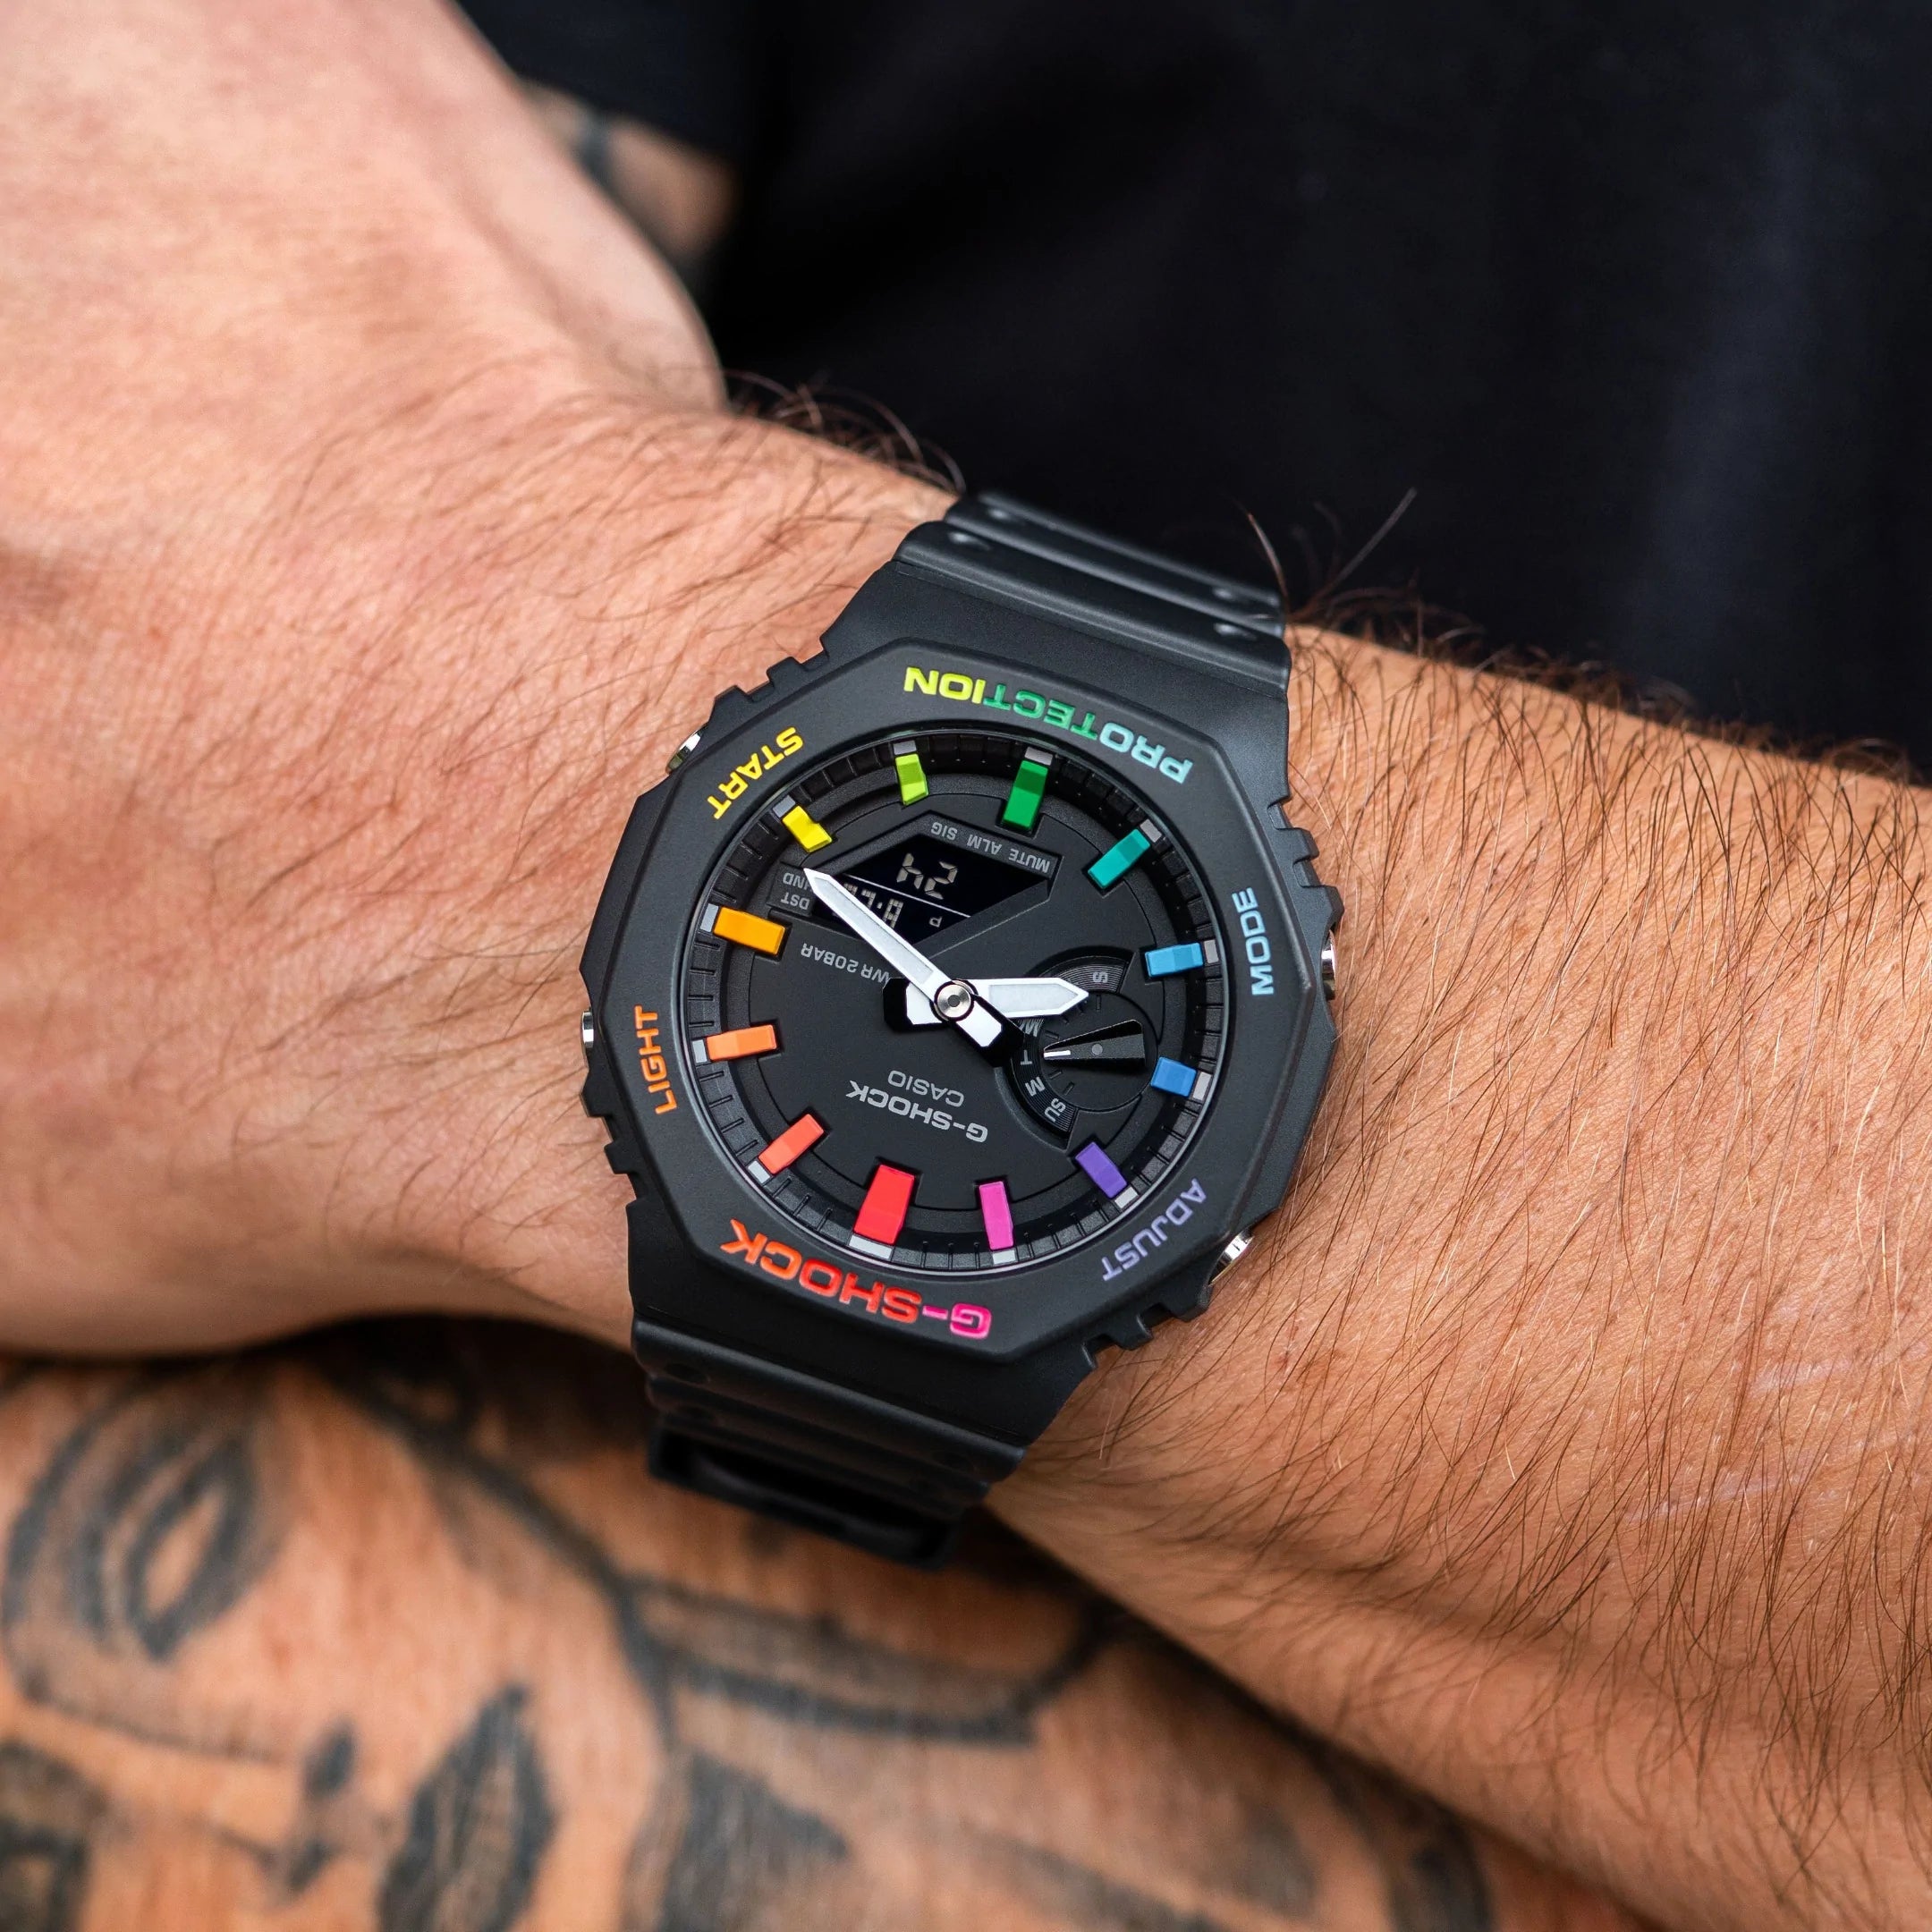 Modified G-Shock with Colourful Indices and Outer Case - CasiOak Black Rainbow